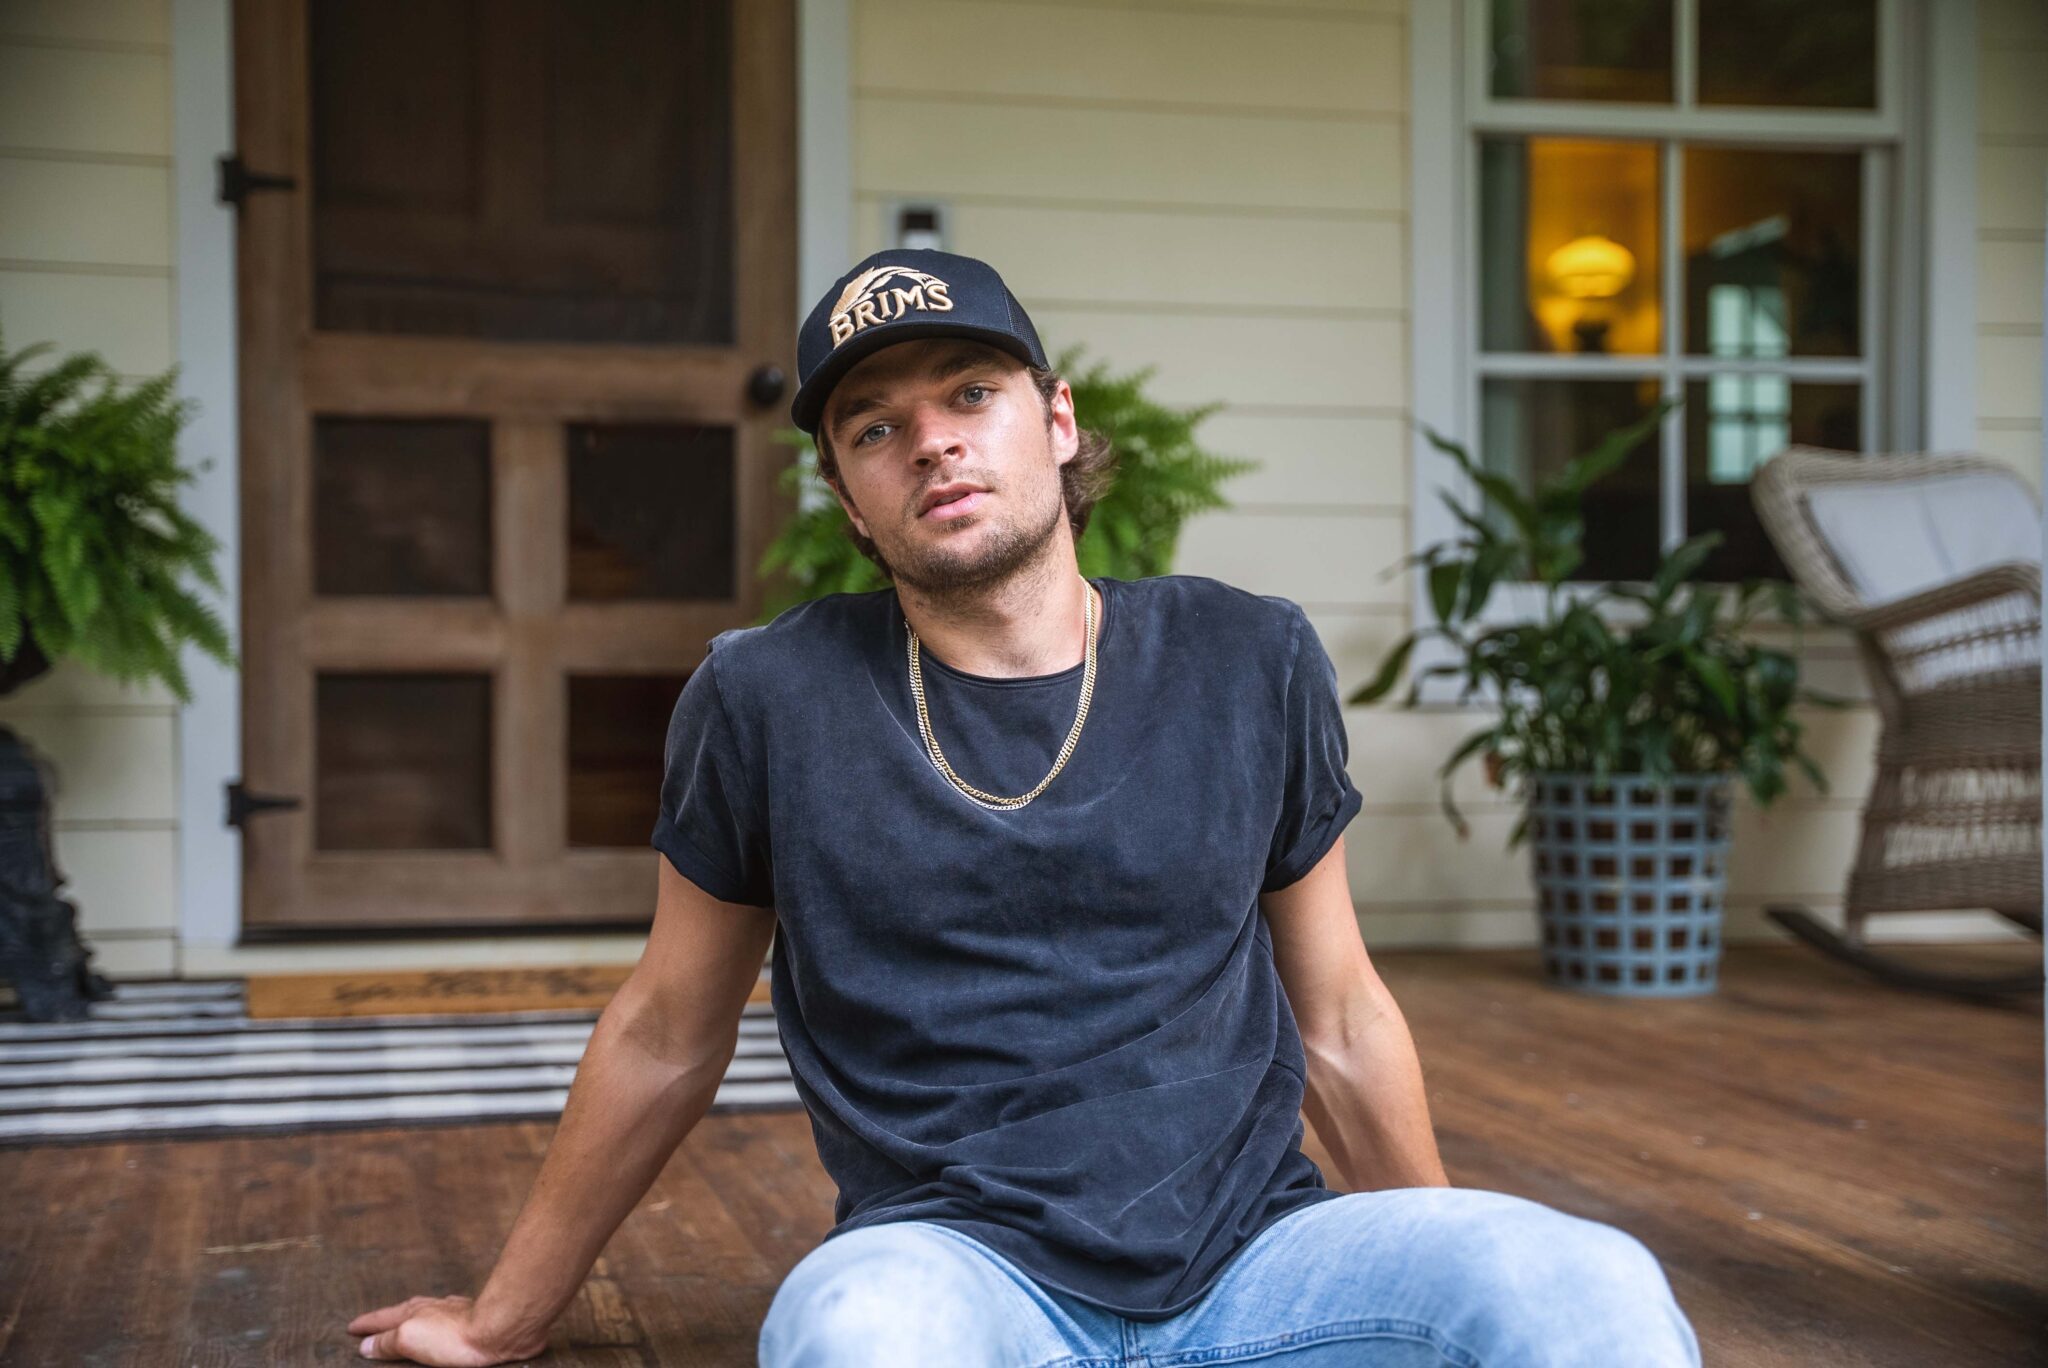 Rising Country Music Star Conner Smith’s Hit Single “Take It Slow” Goes